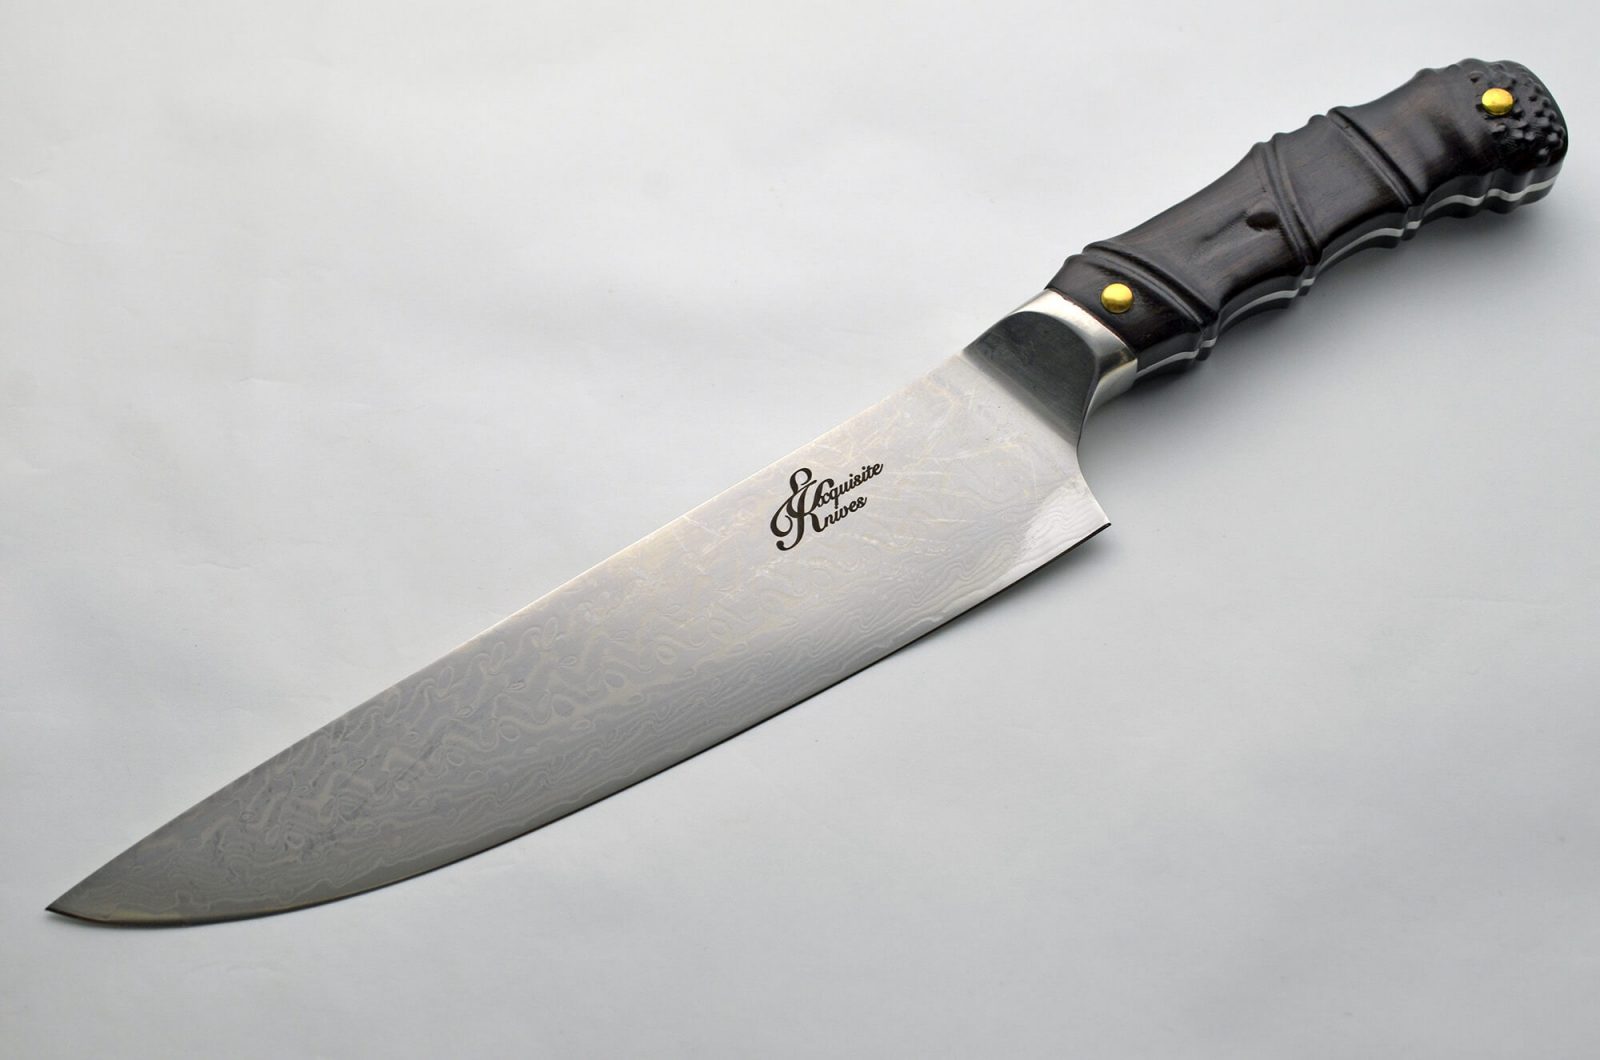 A Guide to Kitchen Knives with 7 Knife Types - Exquisite Knives